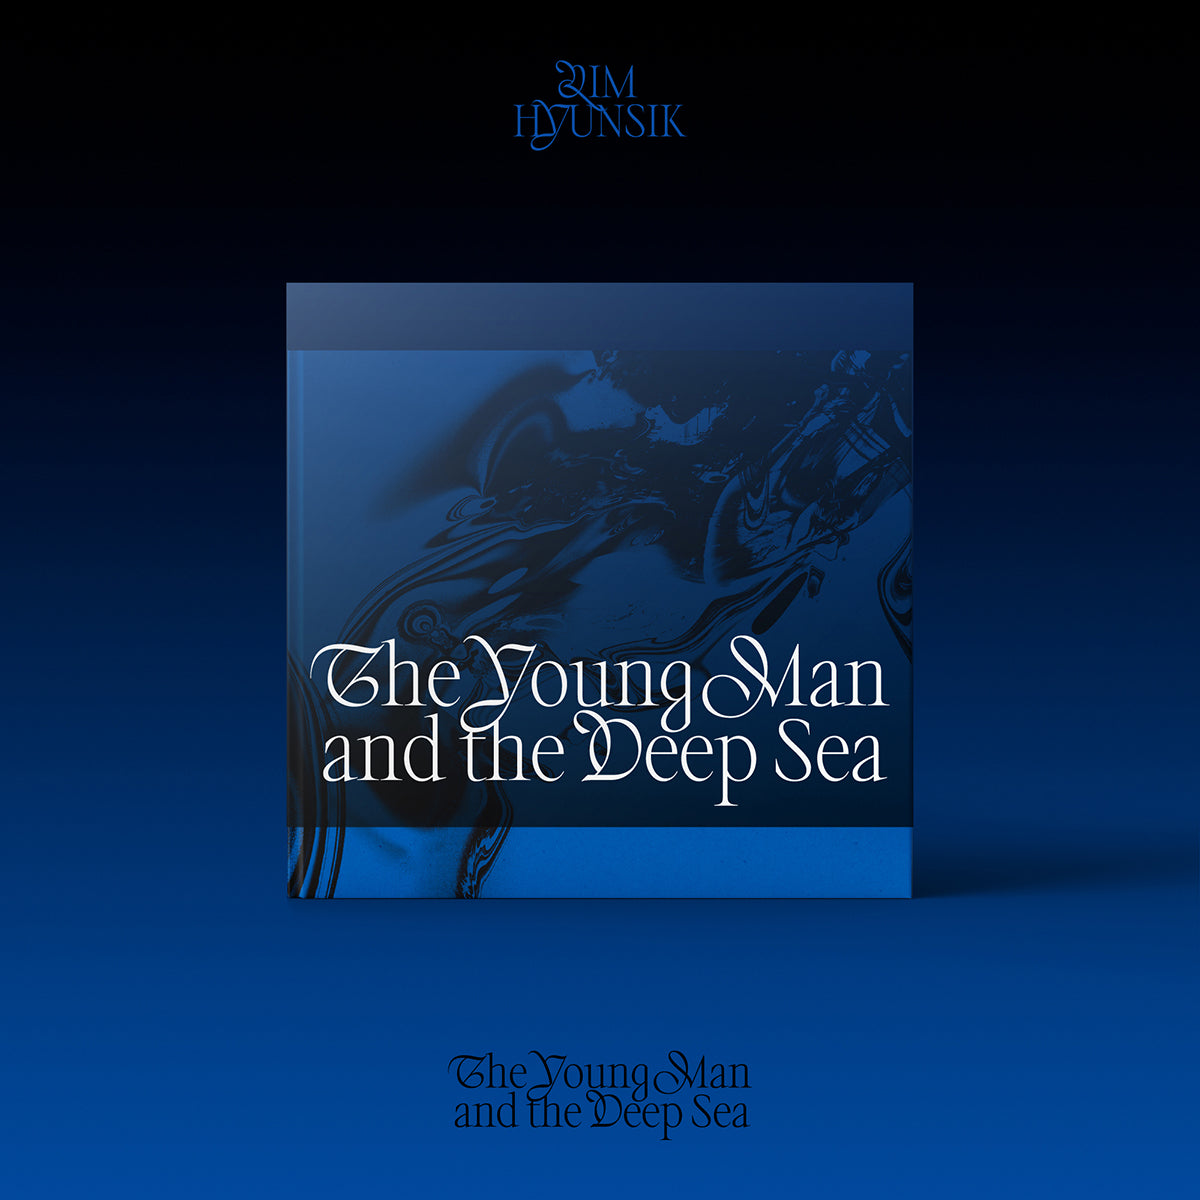 LIM HYUNSIK - The Young Man and the Deep Sea